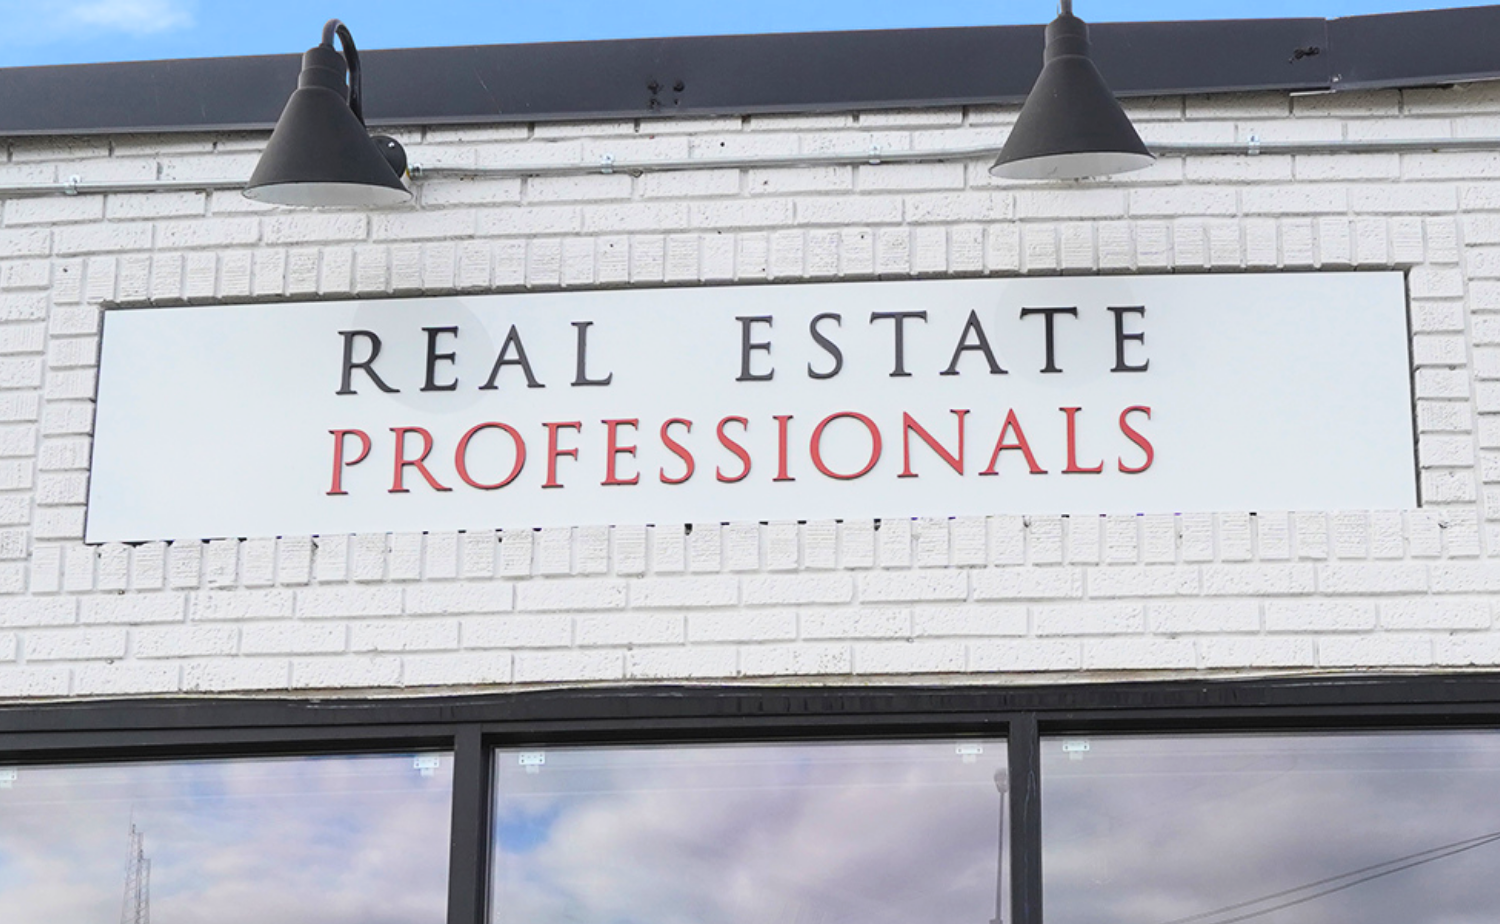 616 REALTY - Real Estate Professionals